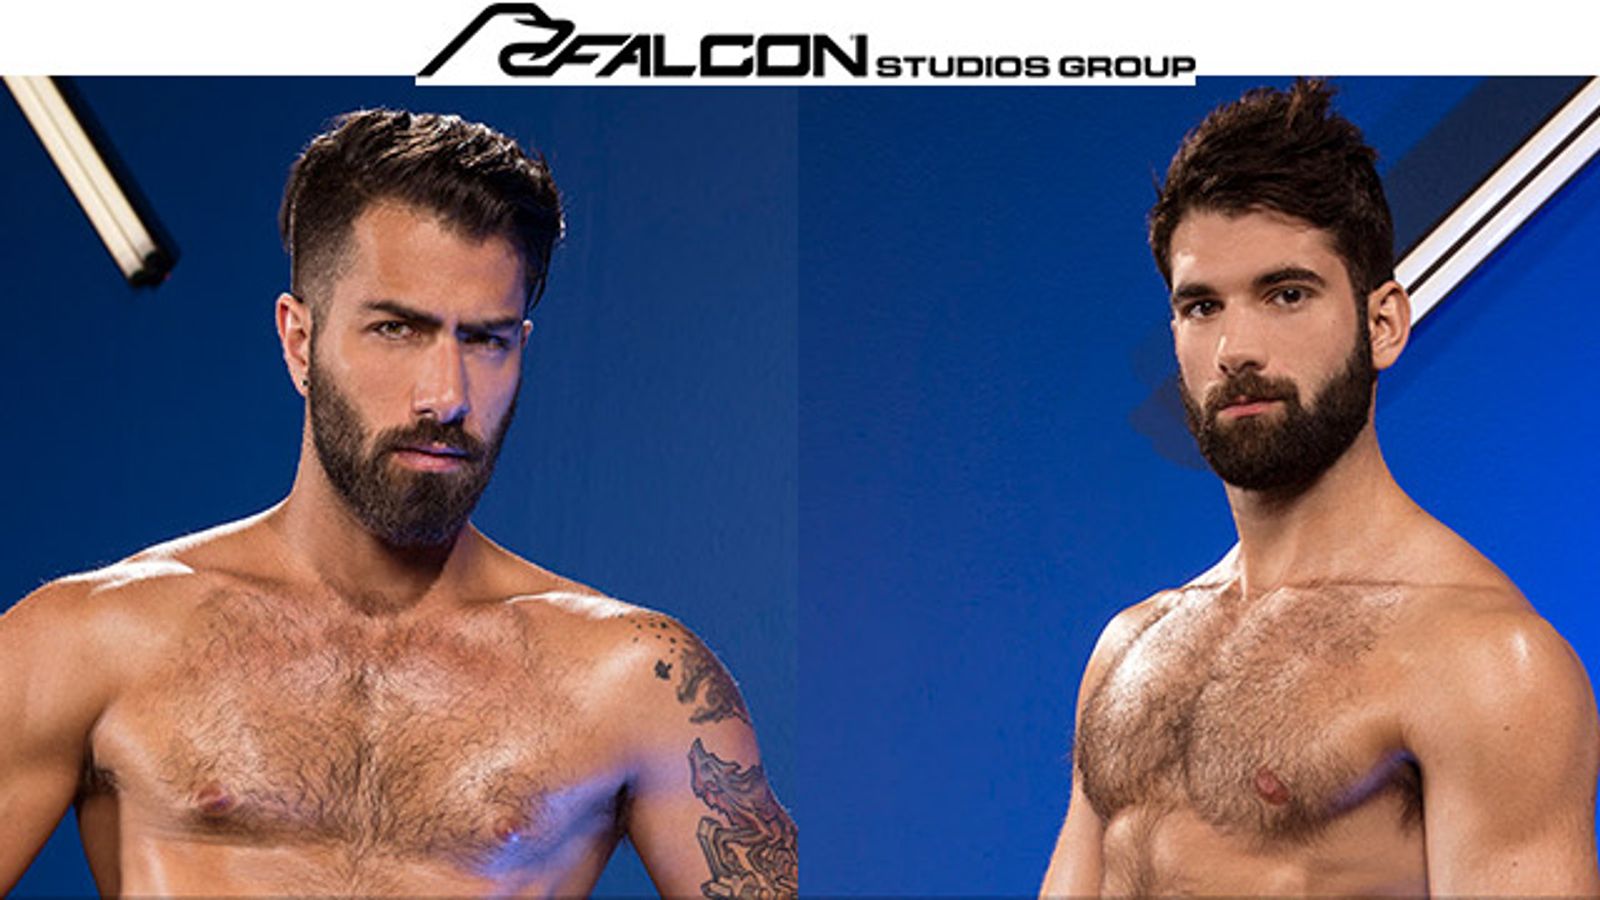 RagingStallion.com Premieres ‘Bout to Bust’ from Hard Friction